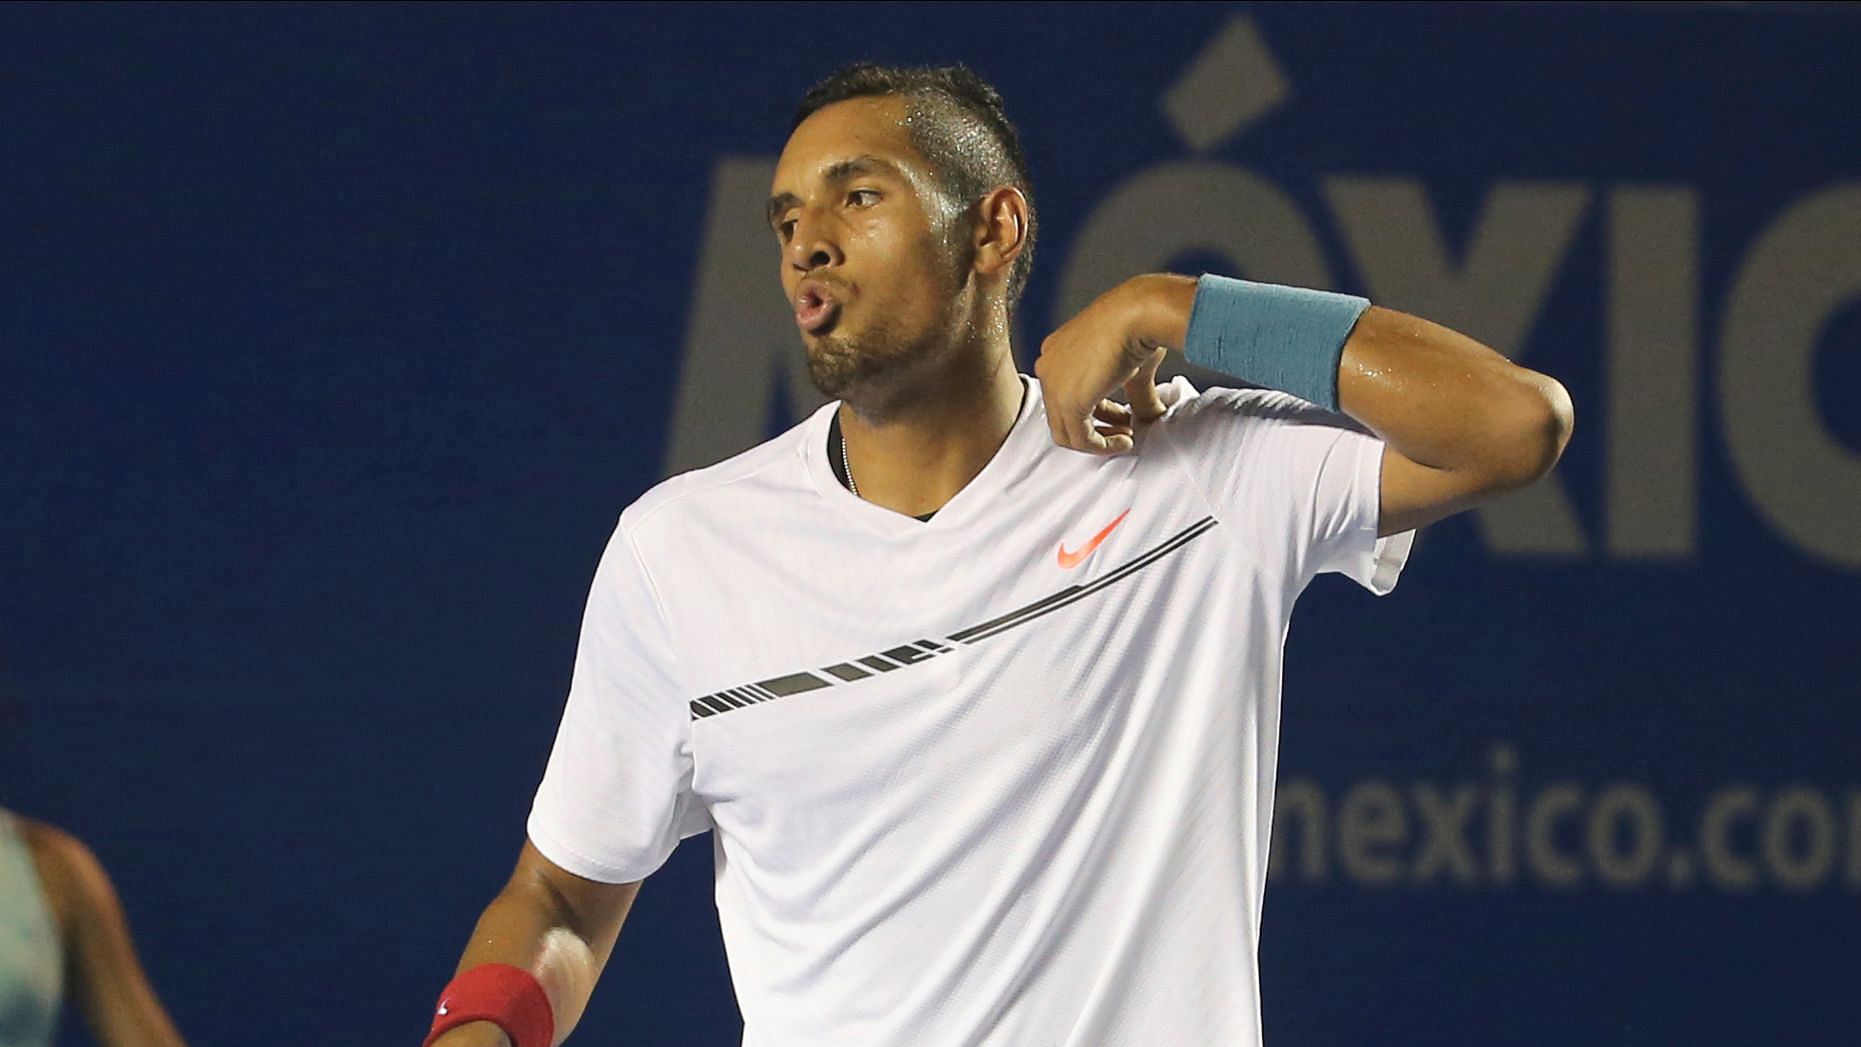 Nick Kyrgios swore at officials and accused them of “rigging” his first-round match at the Queen’s Club.